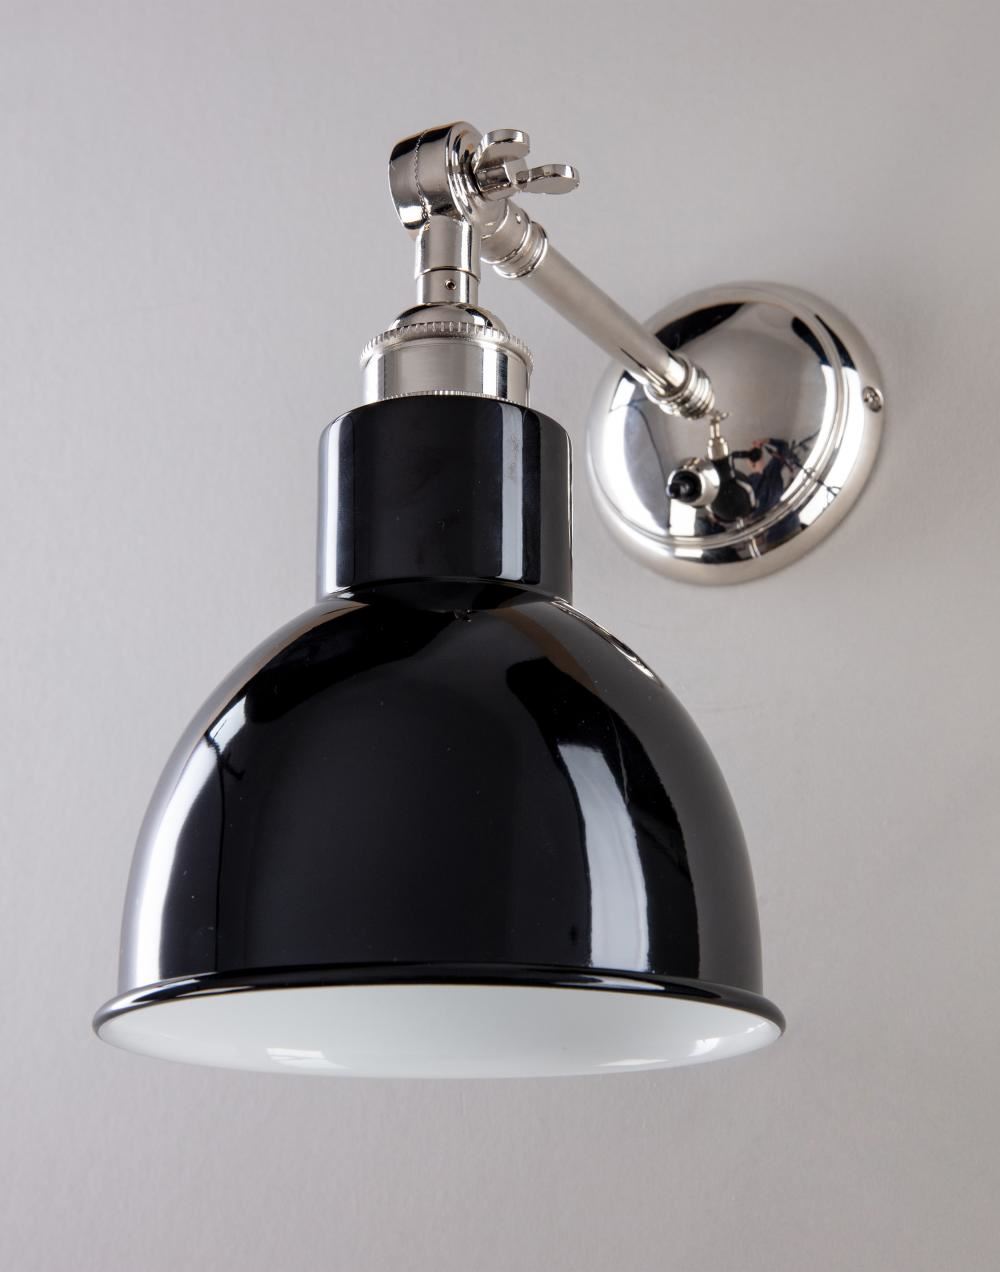 Old School Electric Churchill Wall Light Coloured Shades Switched Polished Nickel Black Shade